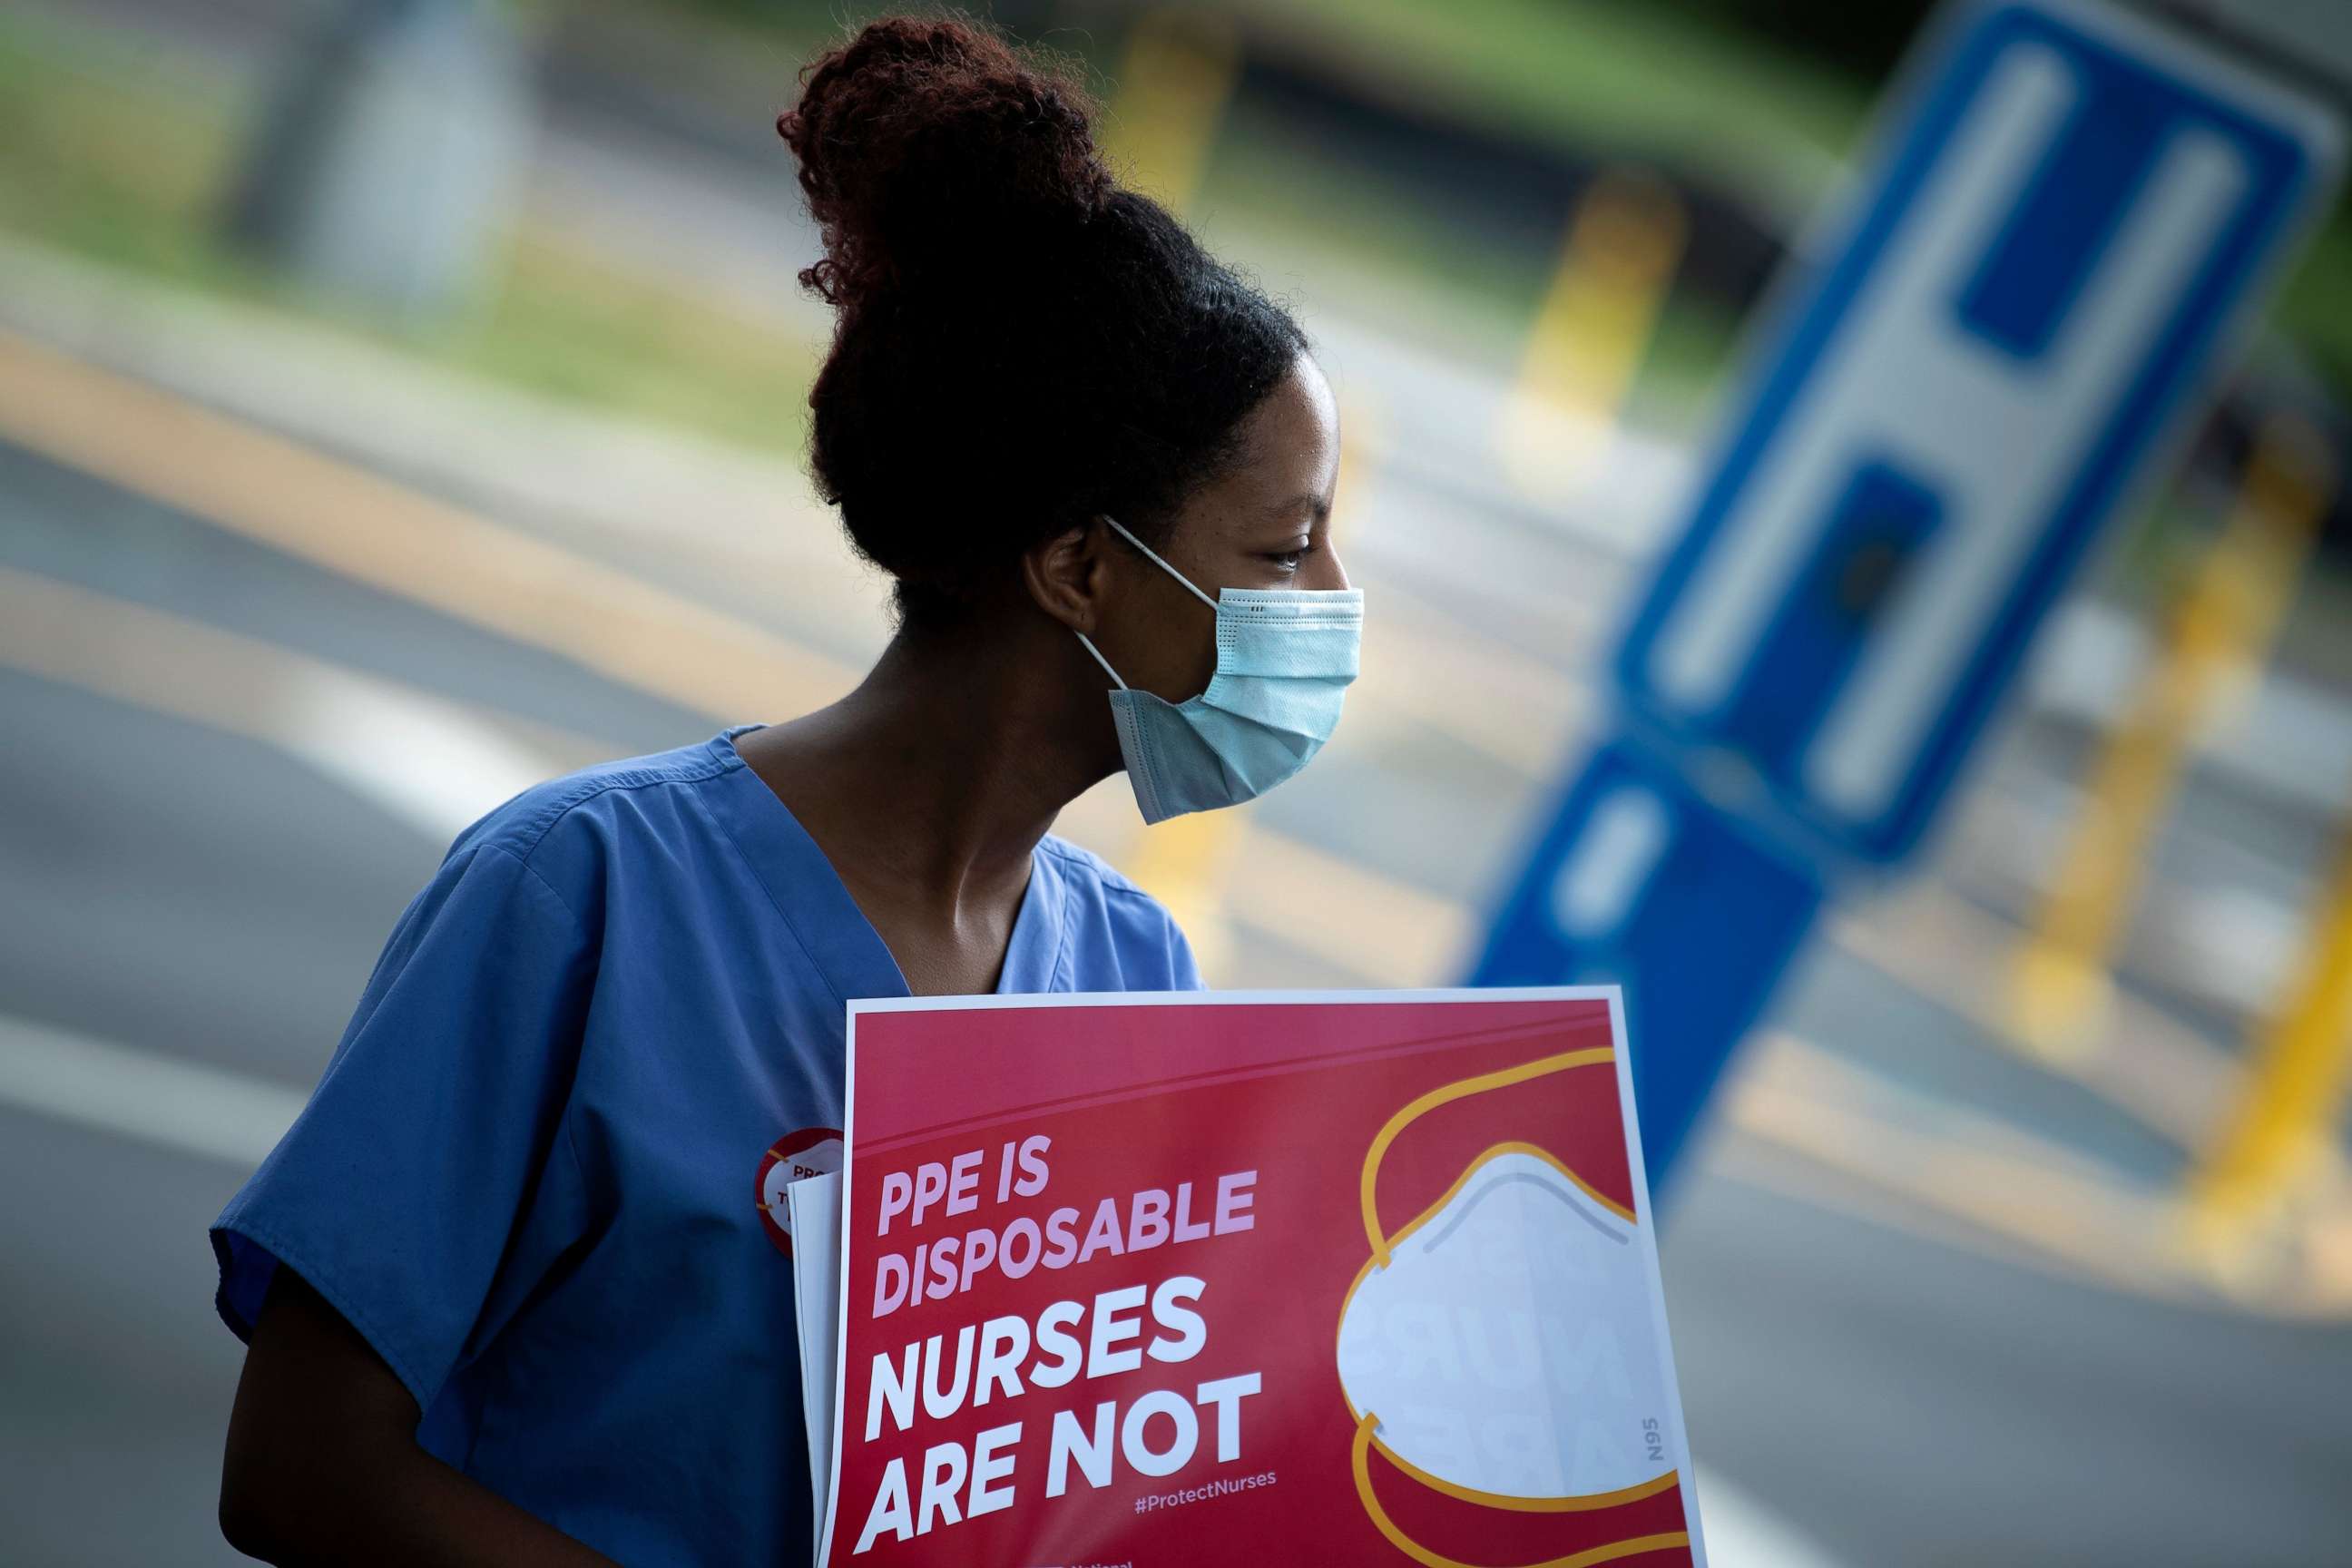 PHOTO: Yuhana Gidey (L), a nurse at Washington hospital center who survived COVID-19, protests demanding better Personal Protective Equipment outside MedStar's Washington Hospital Center on July 23, 2020, in Washington, DC.